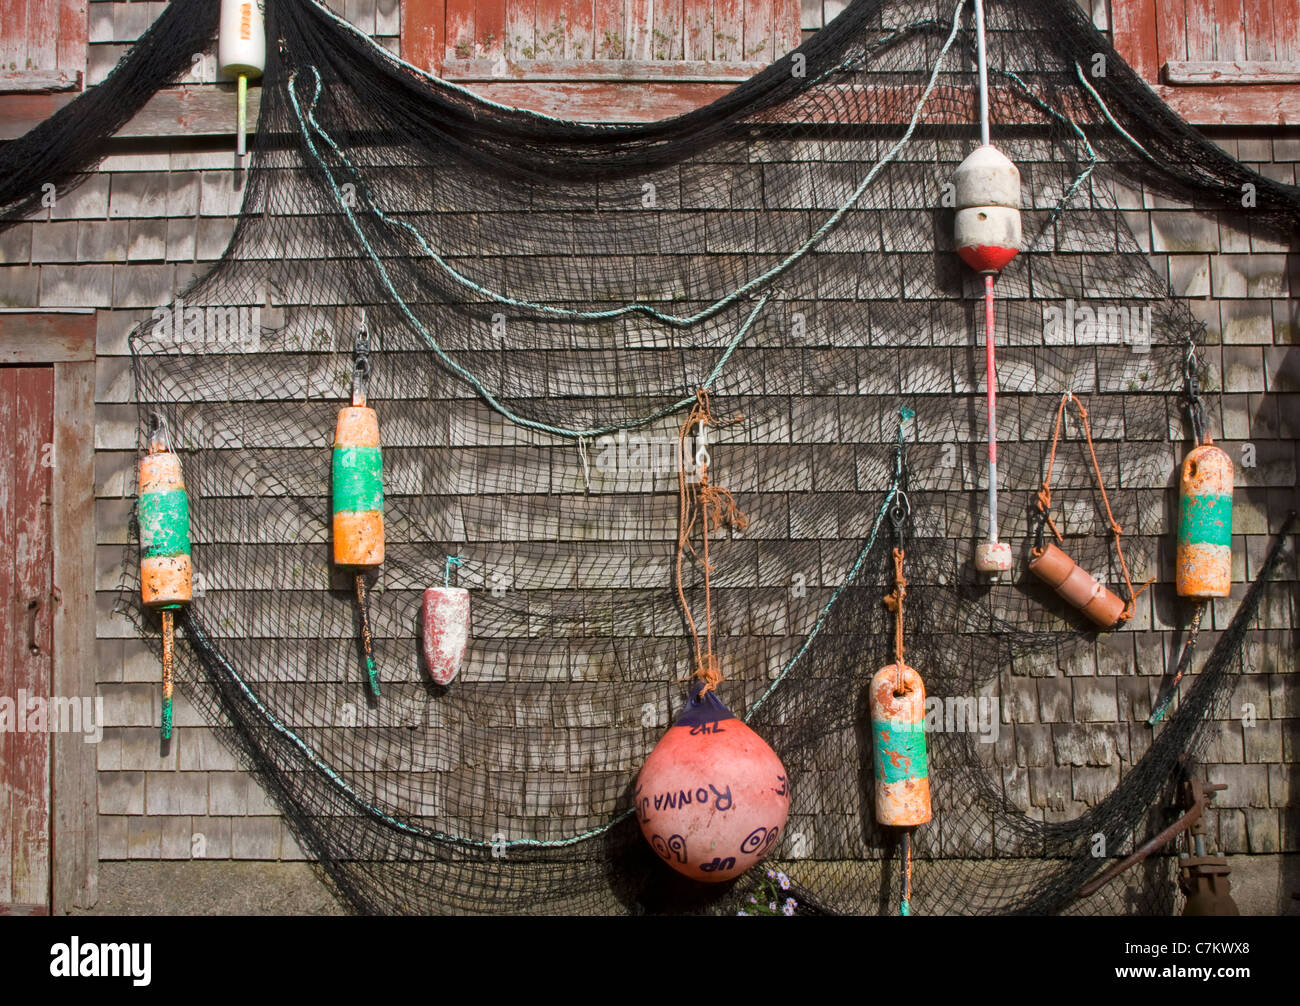 Old buoys on a exterior wall Stock Photo